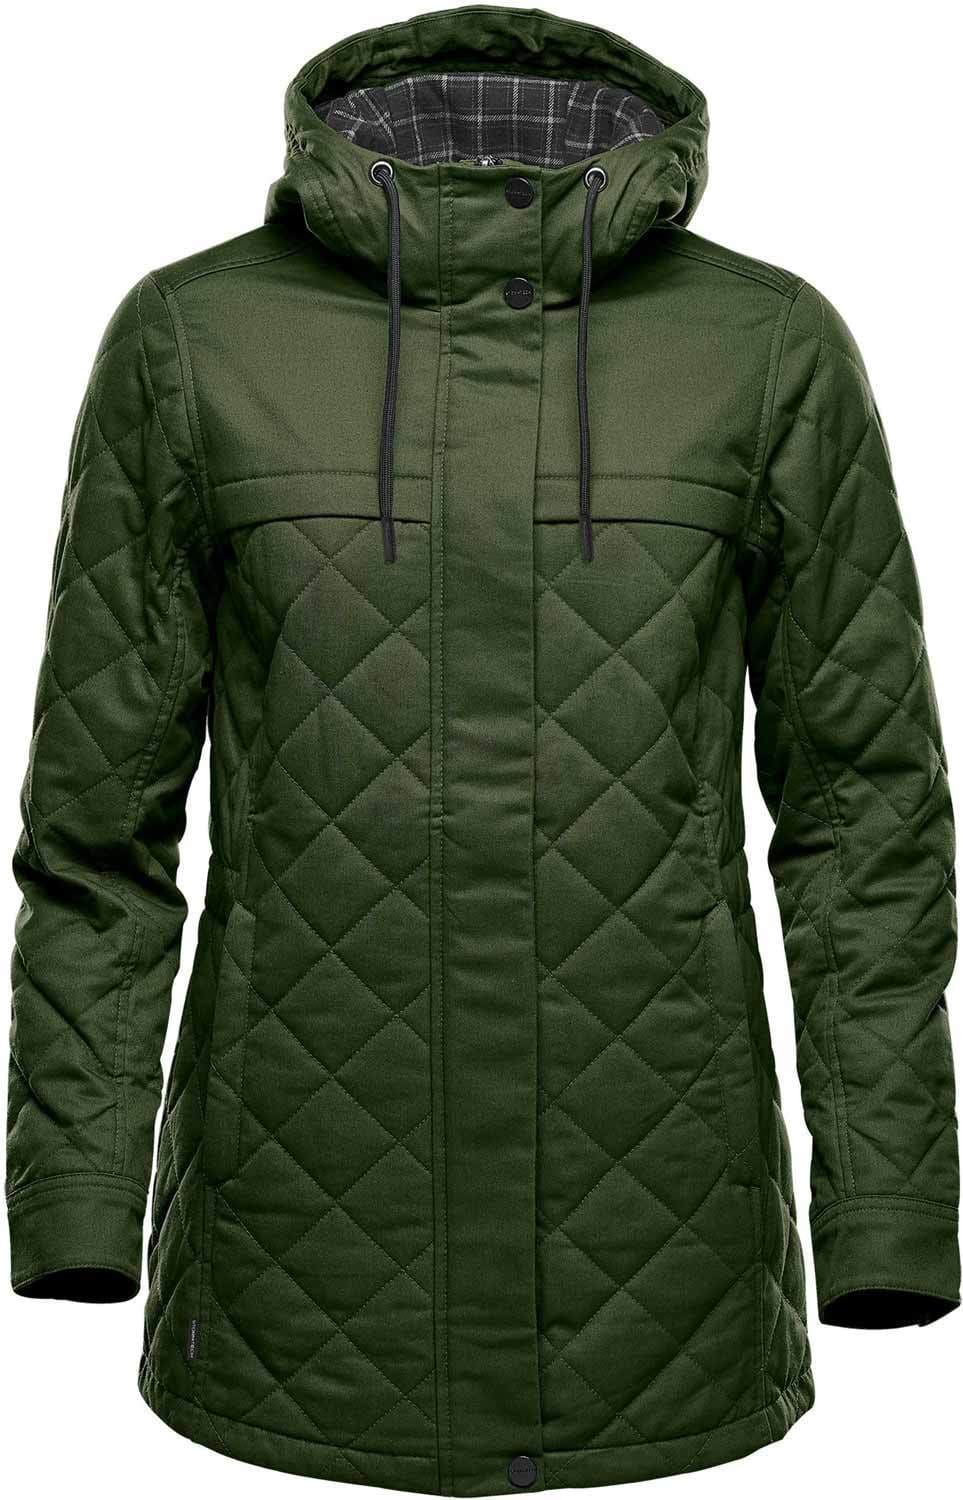 Stormtech Women's Bushwick Quilted Jacket for embroidery or screen